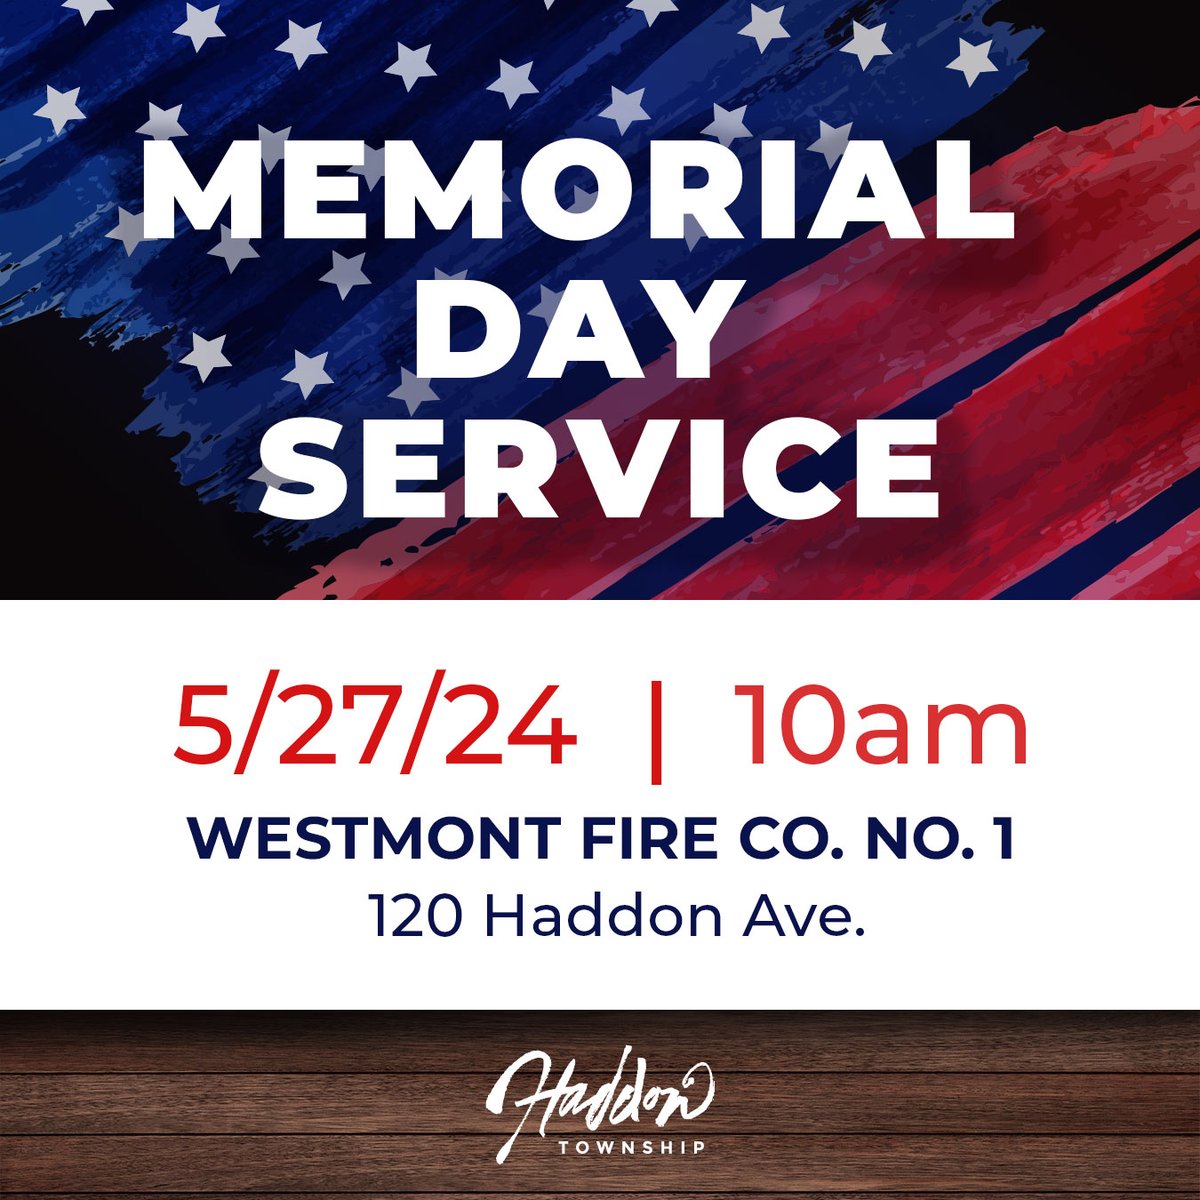 Join us in remembering those who gave the ultimate sacrifice on Monday, May 27th at 10 am at the Westmont Fire Co. No.1.  #memorialday #neverforget #haddontwp